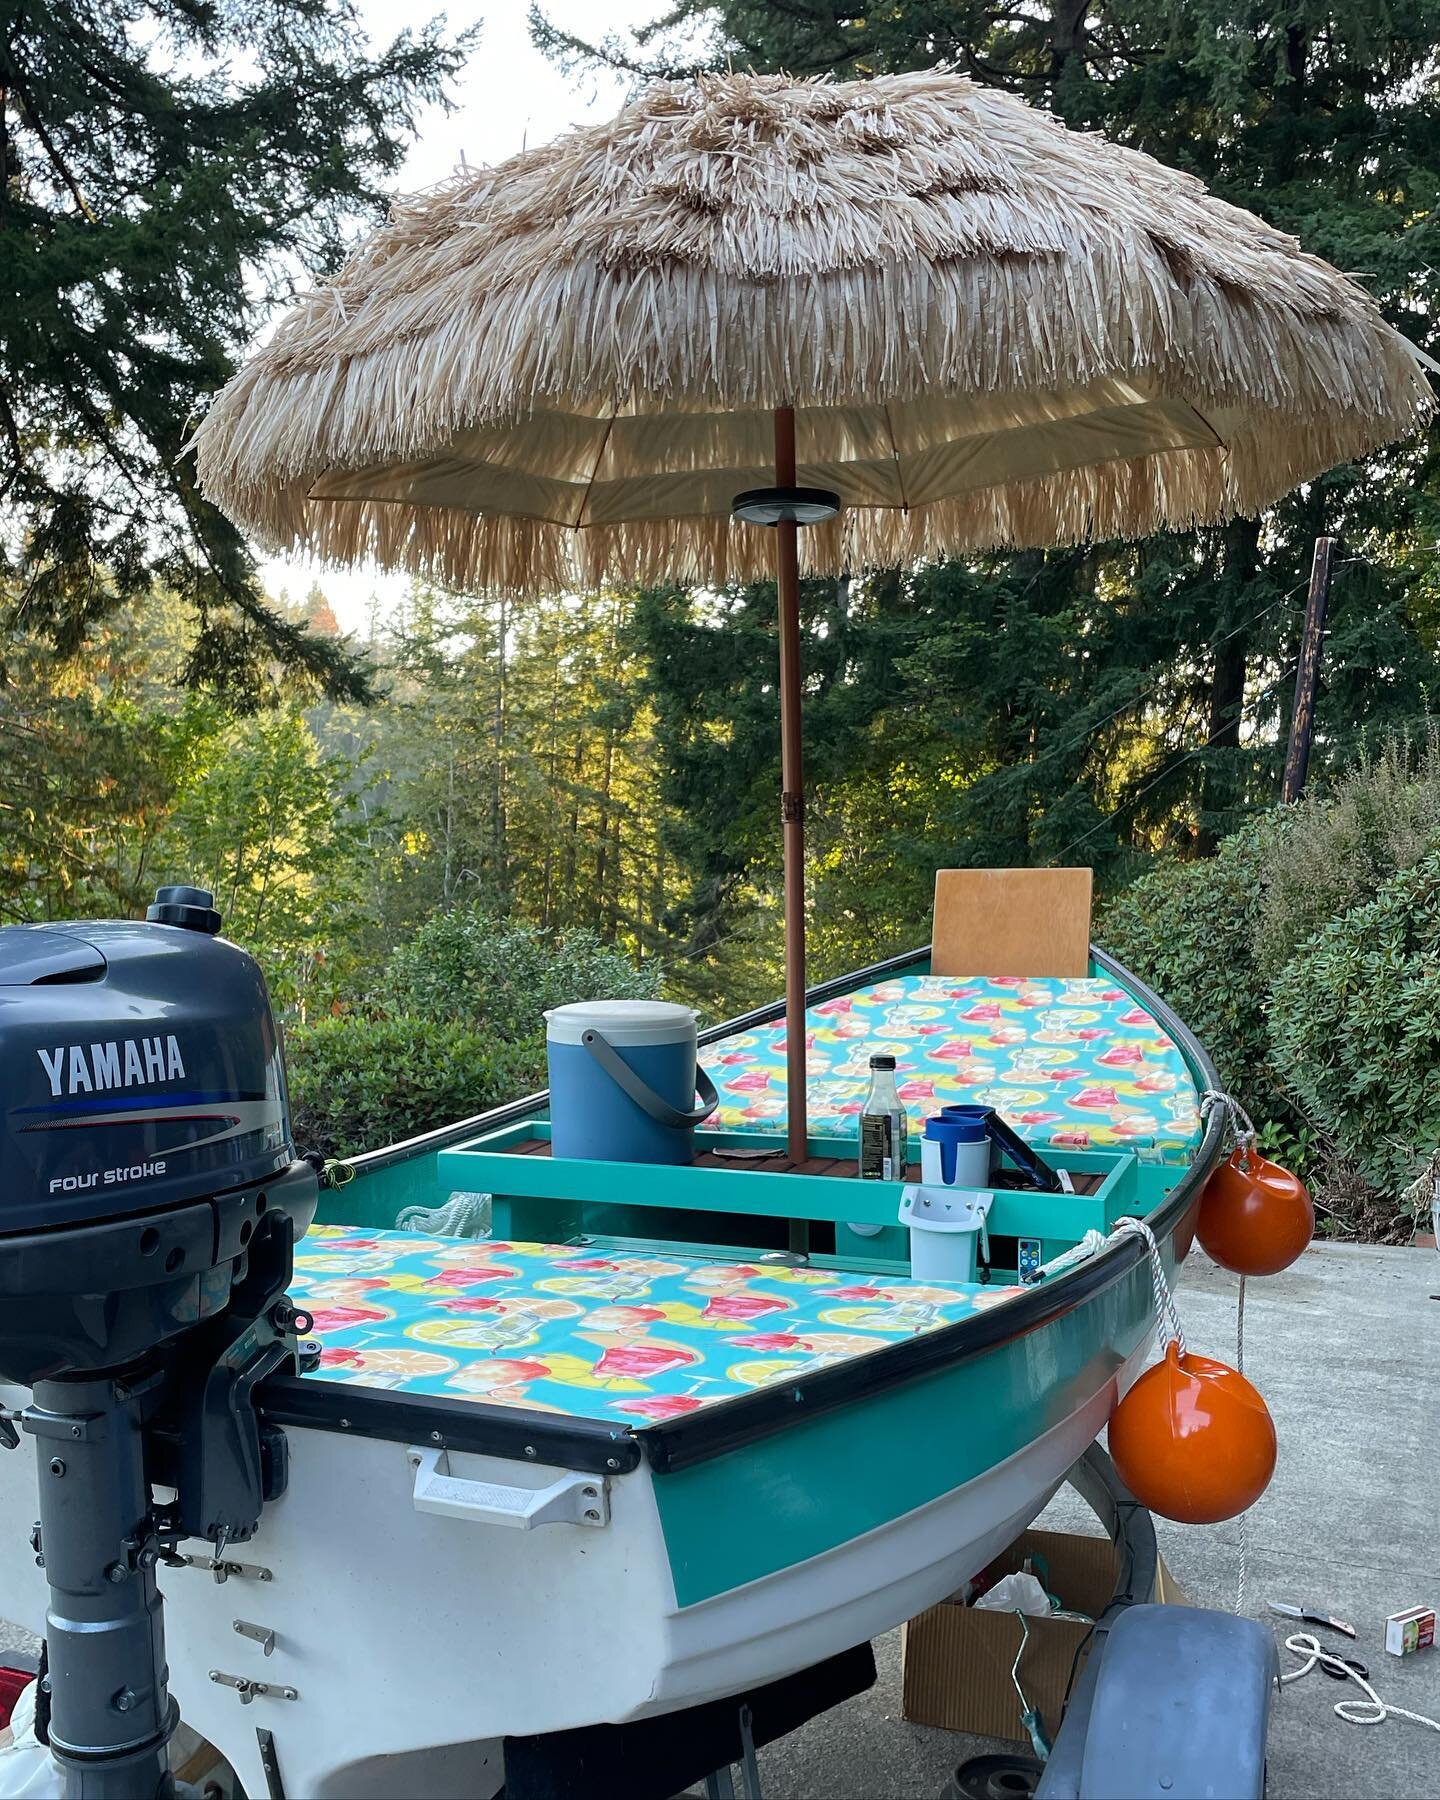 I did a fun little boat cushion project for my neighbor&rsquo;s tiki boat. He&rsquo;s a super fun guy and is putting a lotta heart into this labor of love - and a few cup holders as well. #margaritaville